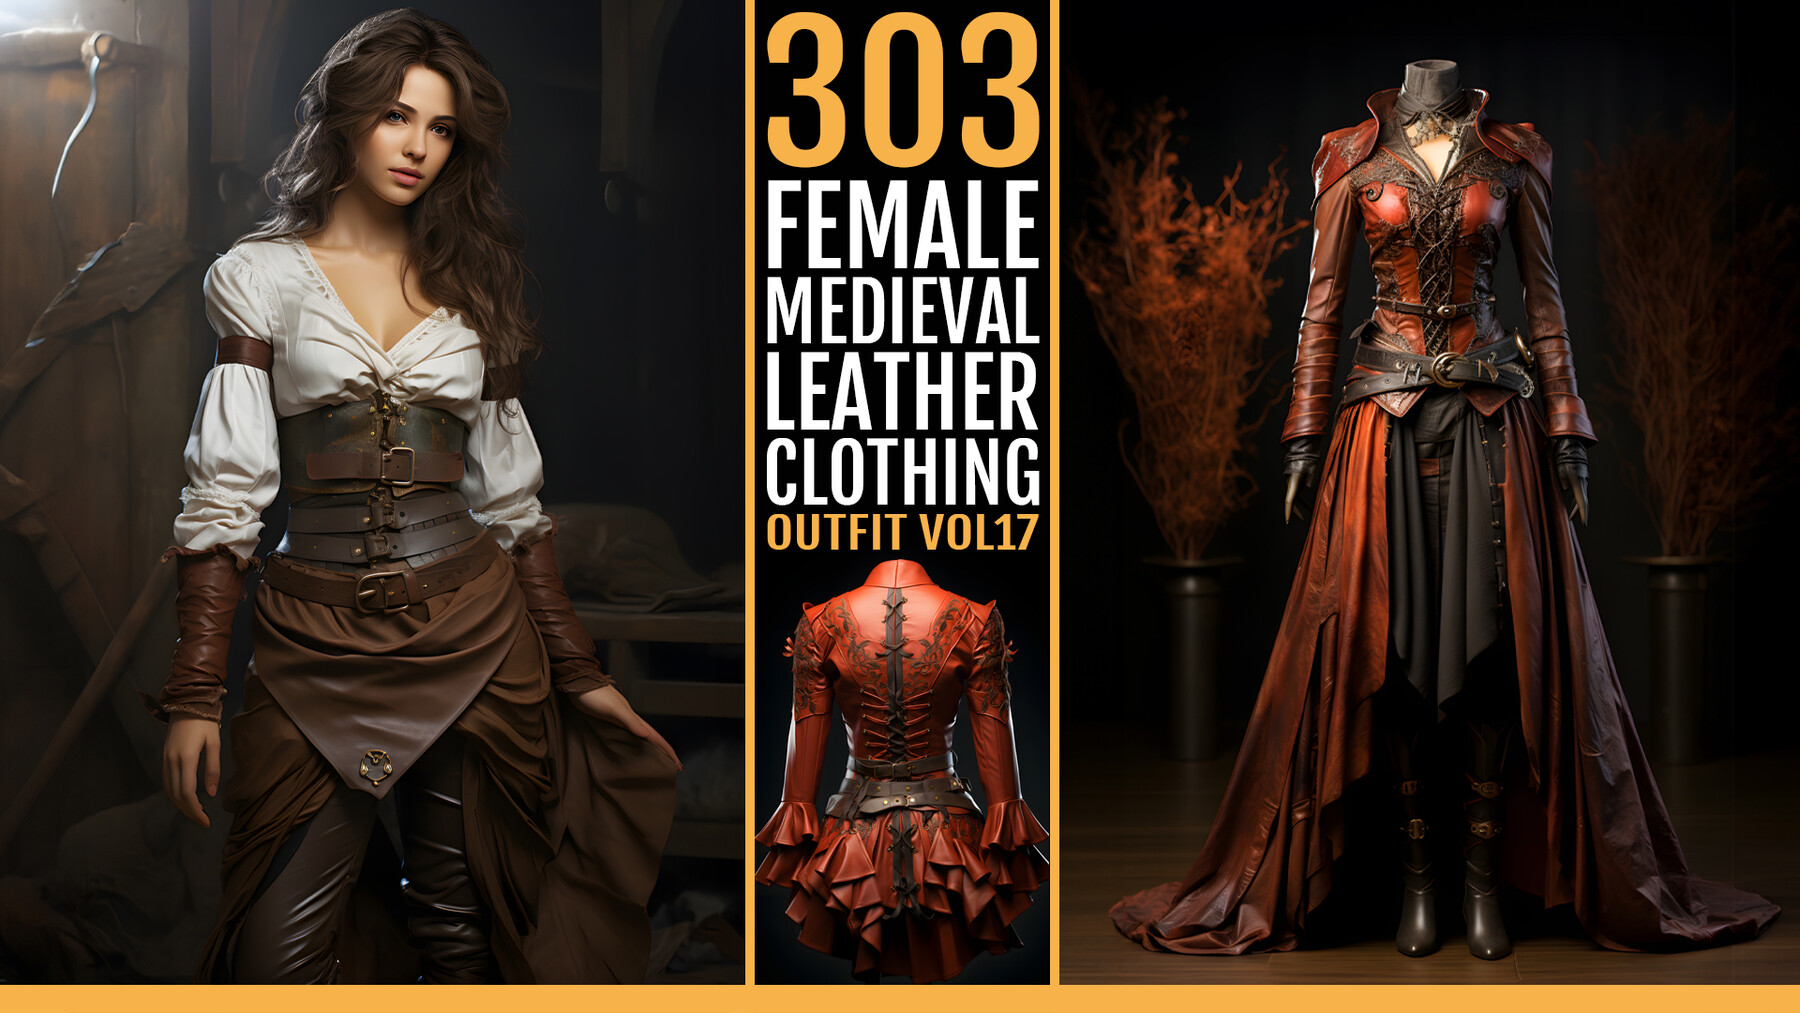 ArtStation - 303 Women's Medieval Leather Clothing VOL17